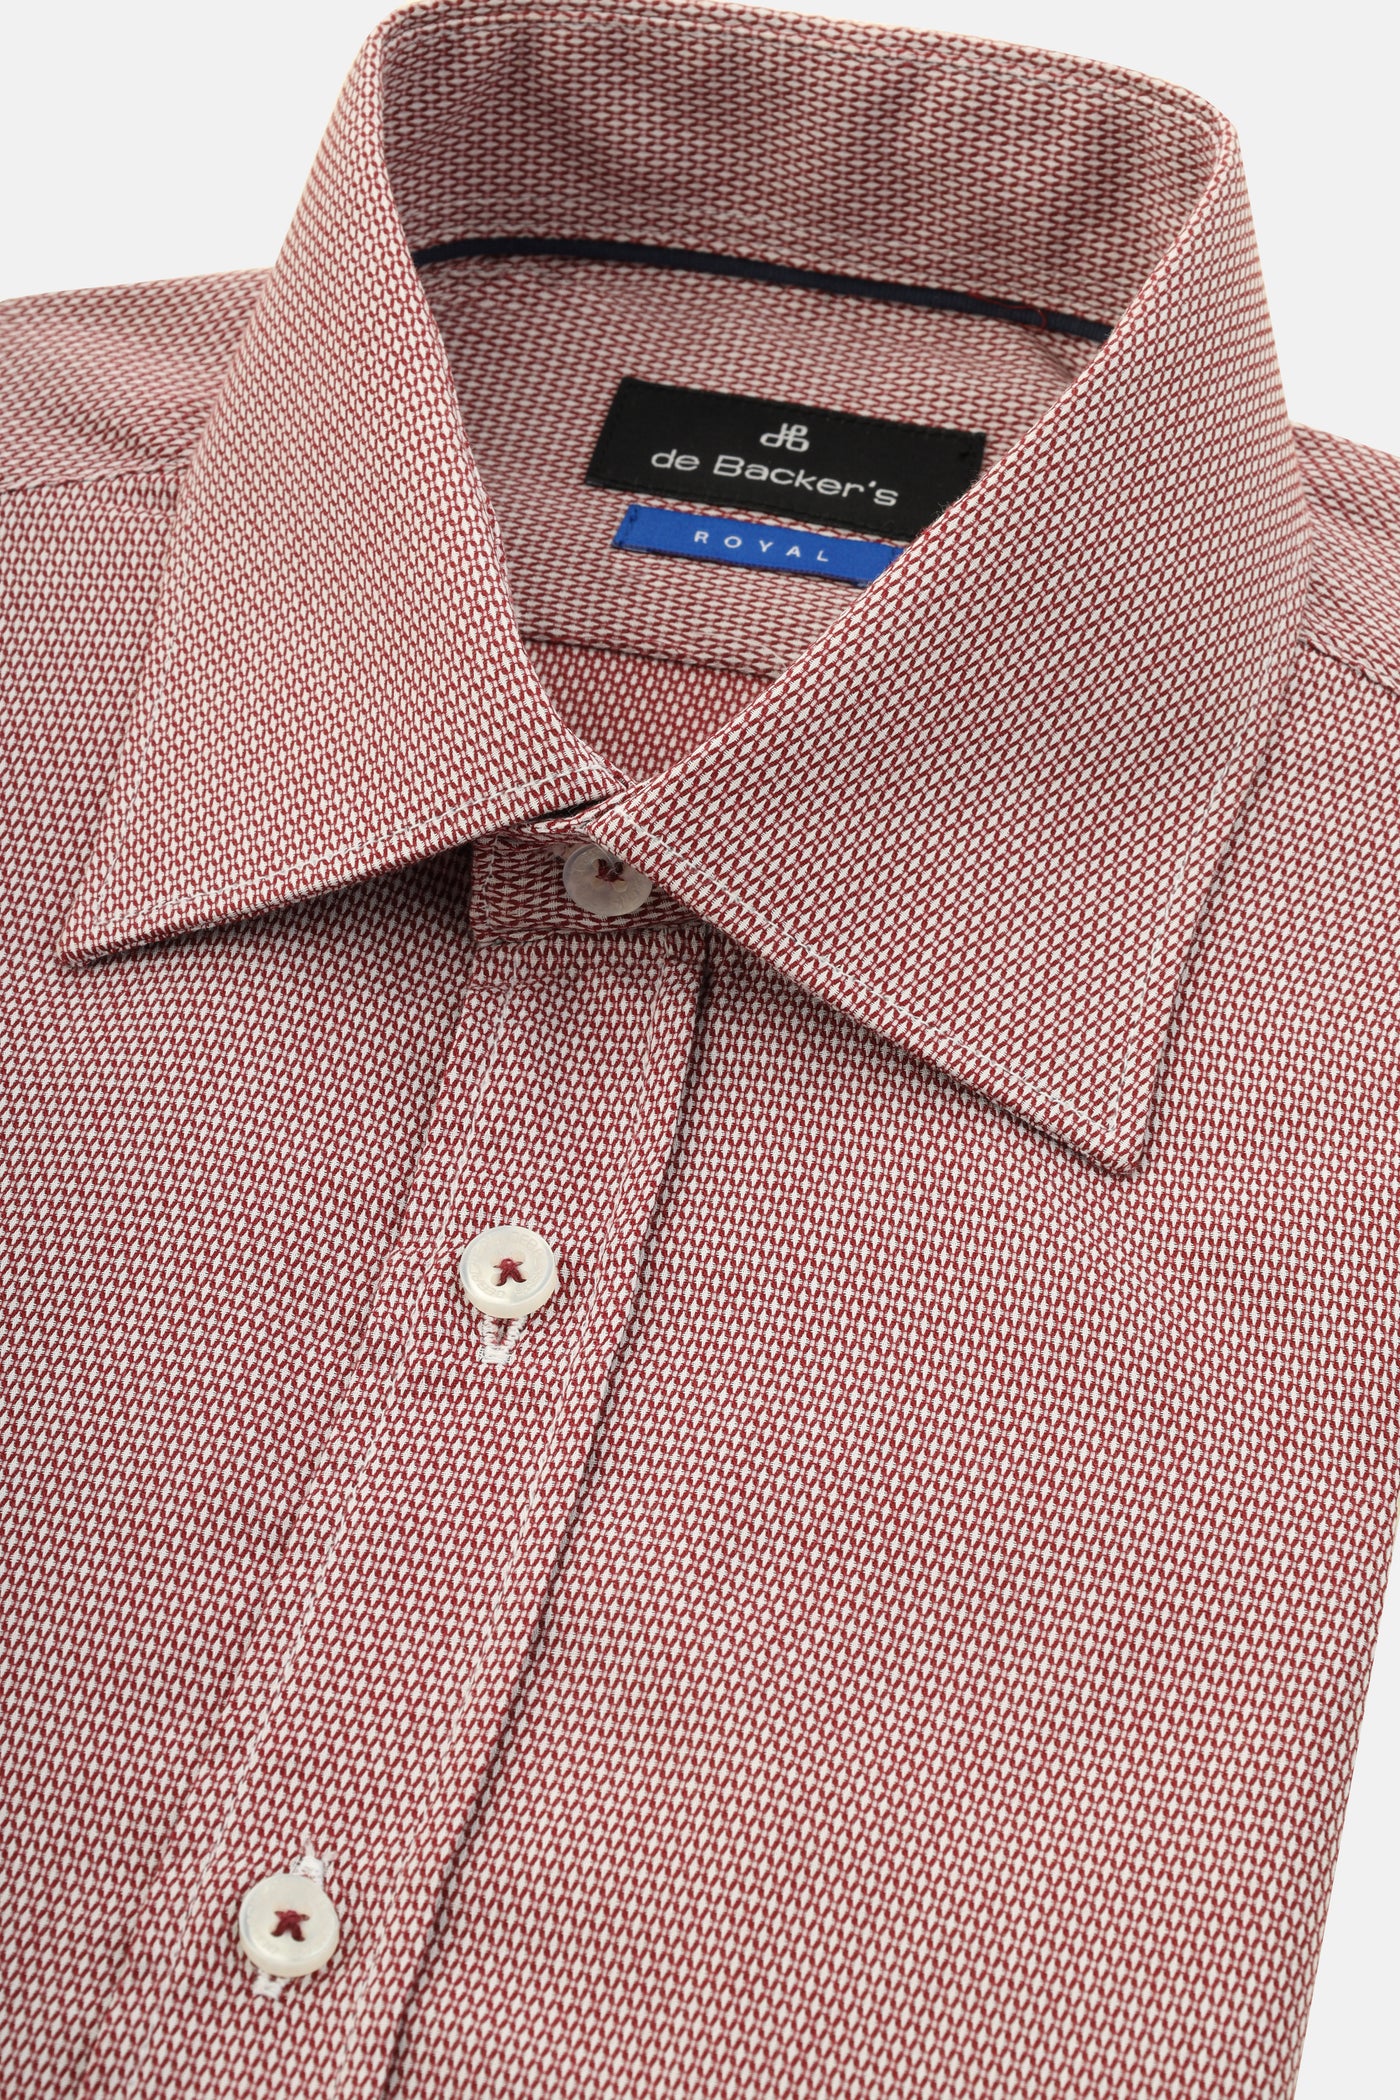 patterned Dark Red  & White Cotton Smart Casual Shirt